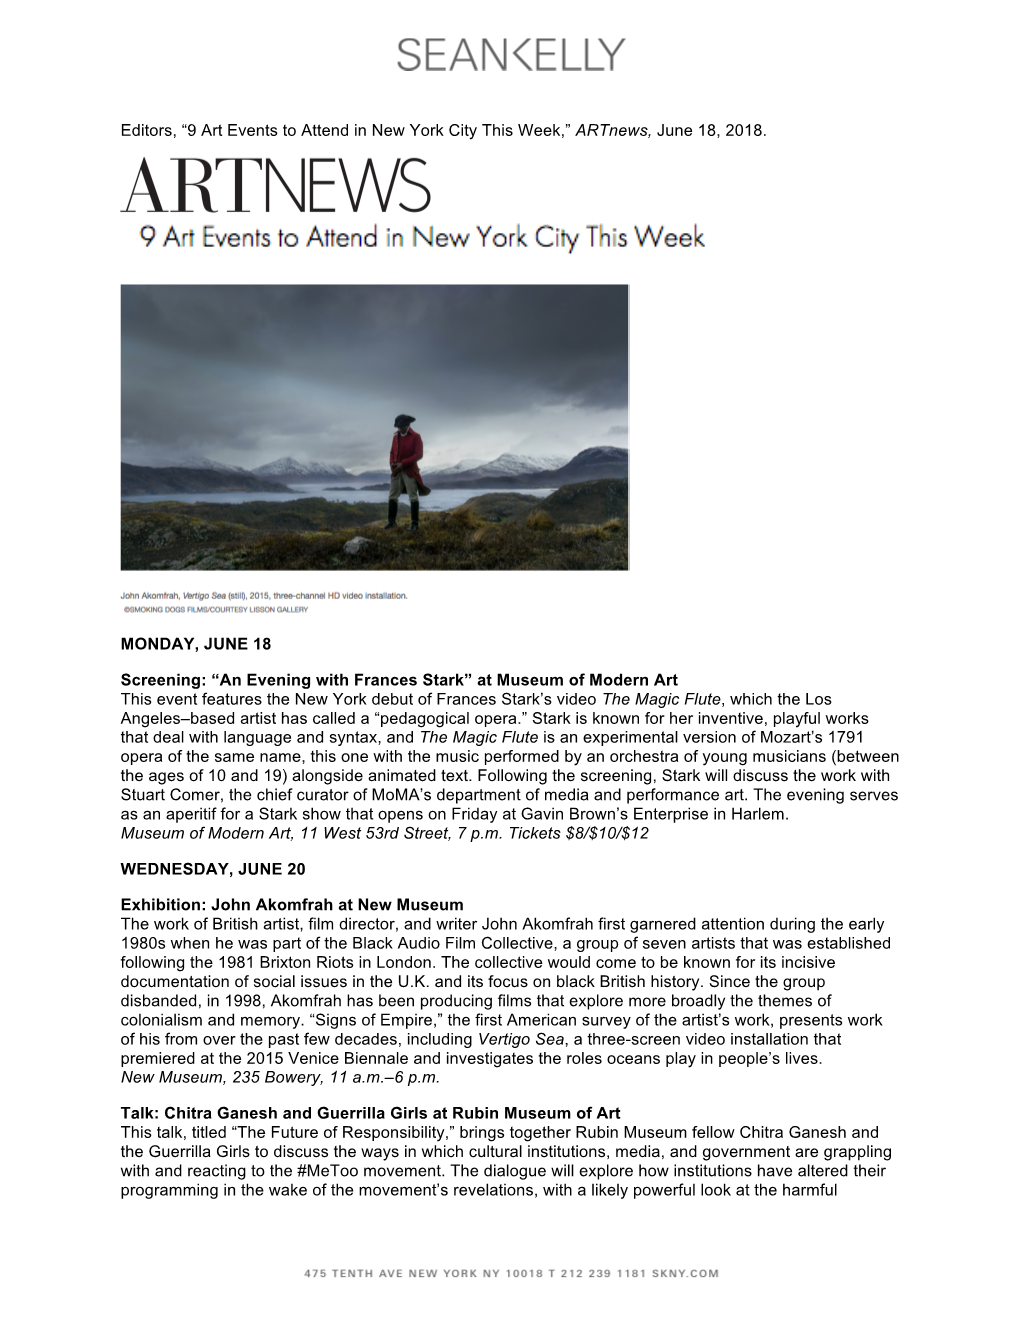 “9 Art Events to Attend in New York City This Week,” Artnews, June 18, 2018